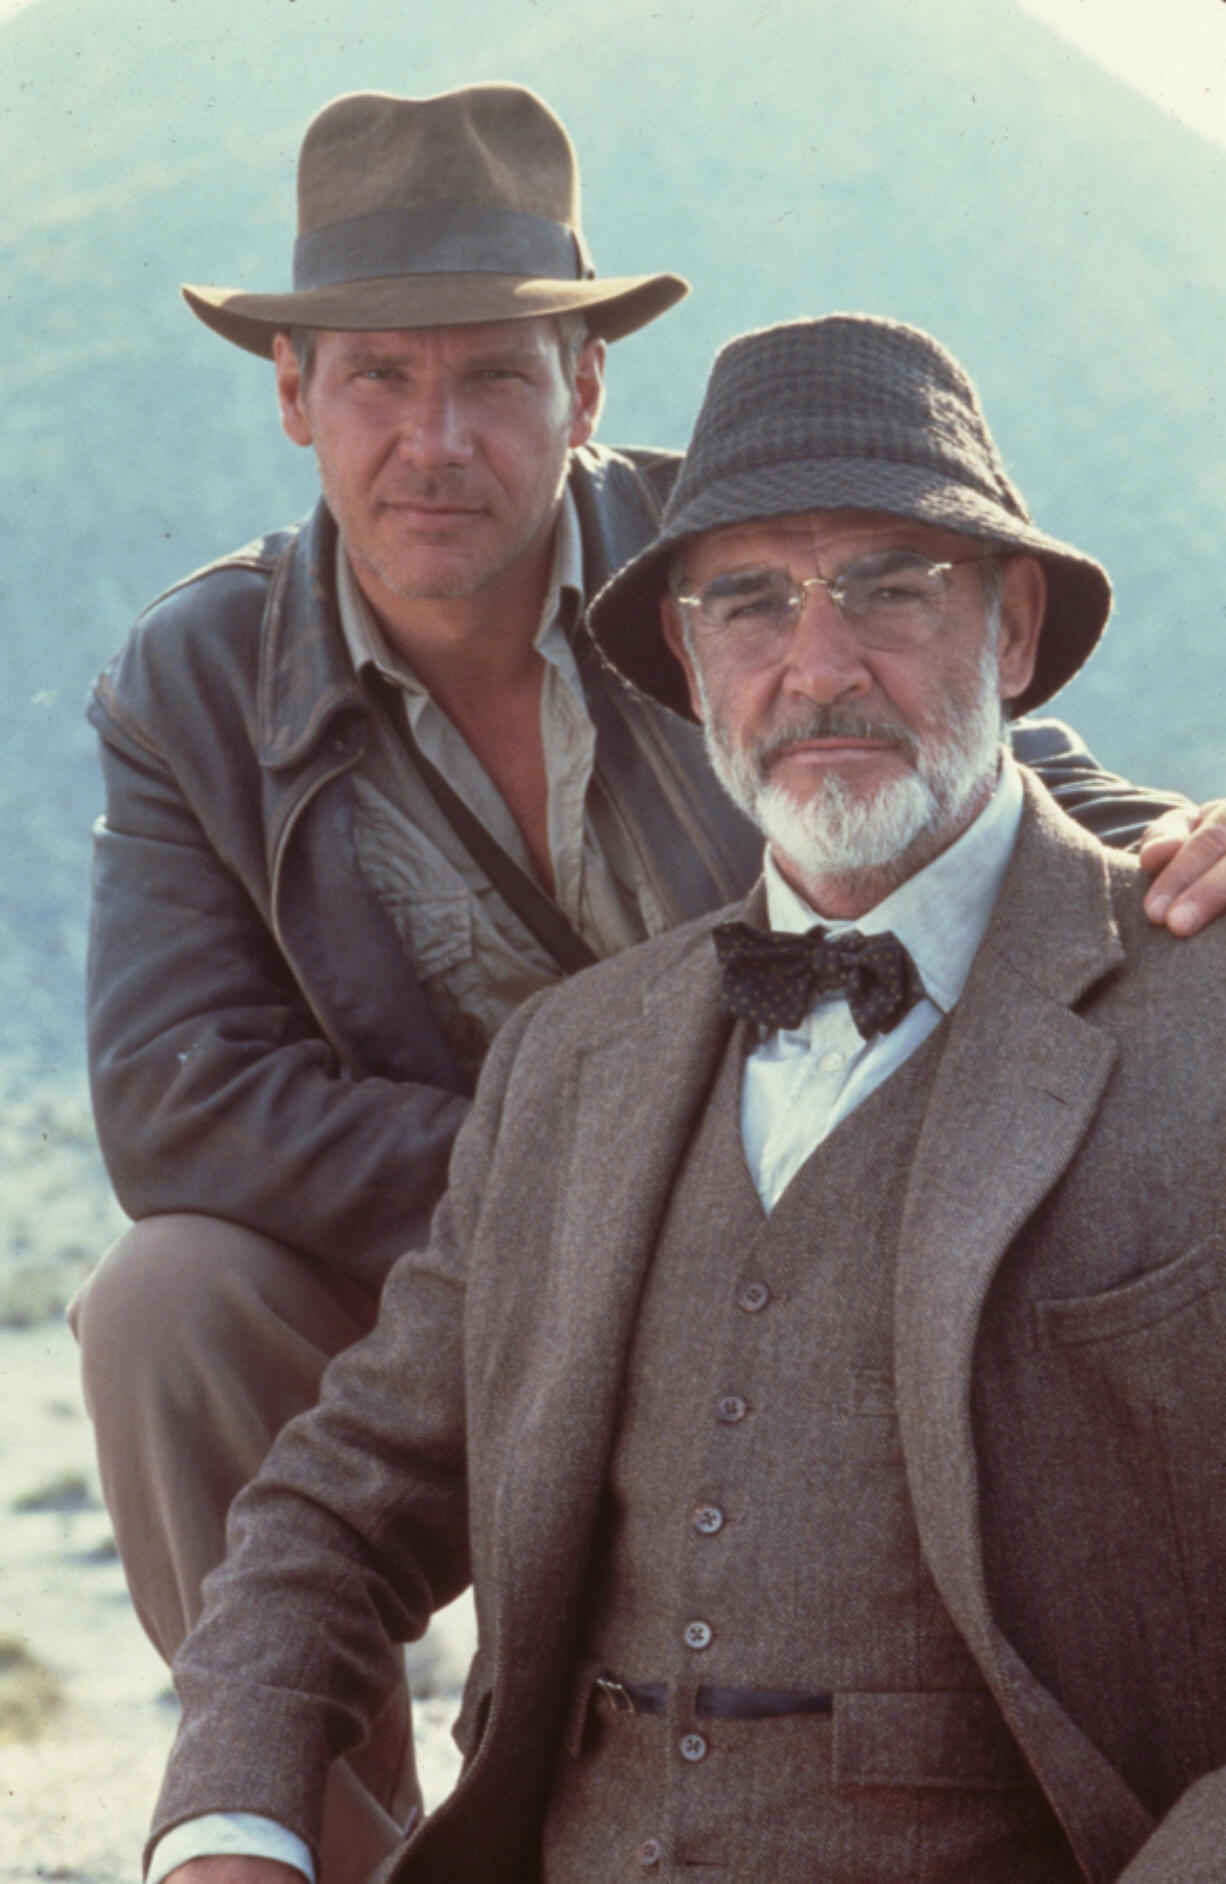 Harrison Ford, left, as Indiana Jones and Sean Connery as Henry Jones in "Indiana Jones and the Last Crusade." (SNAP/Entertainment Pictures/Zuma Press)